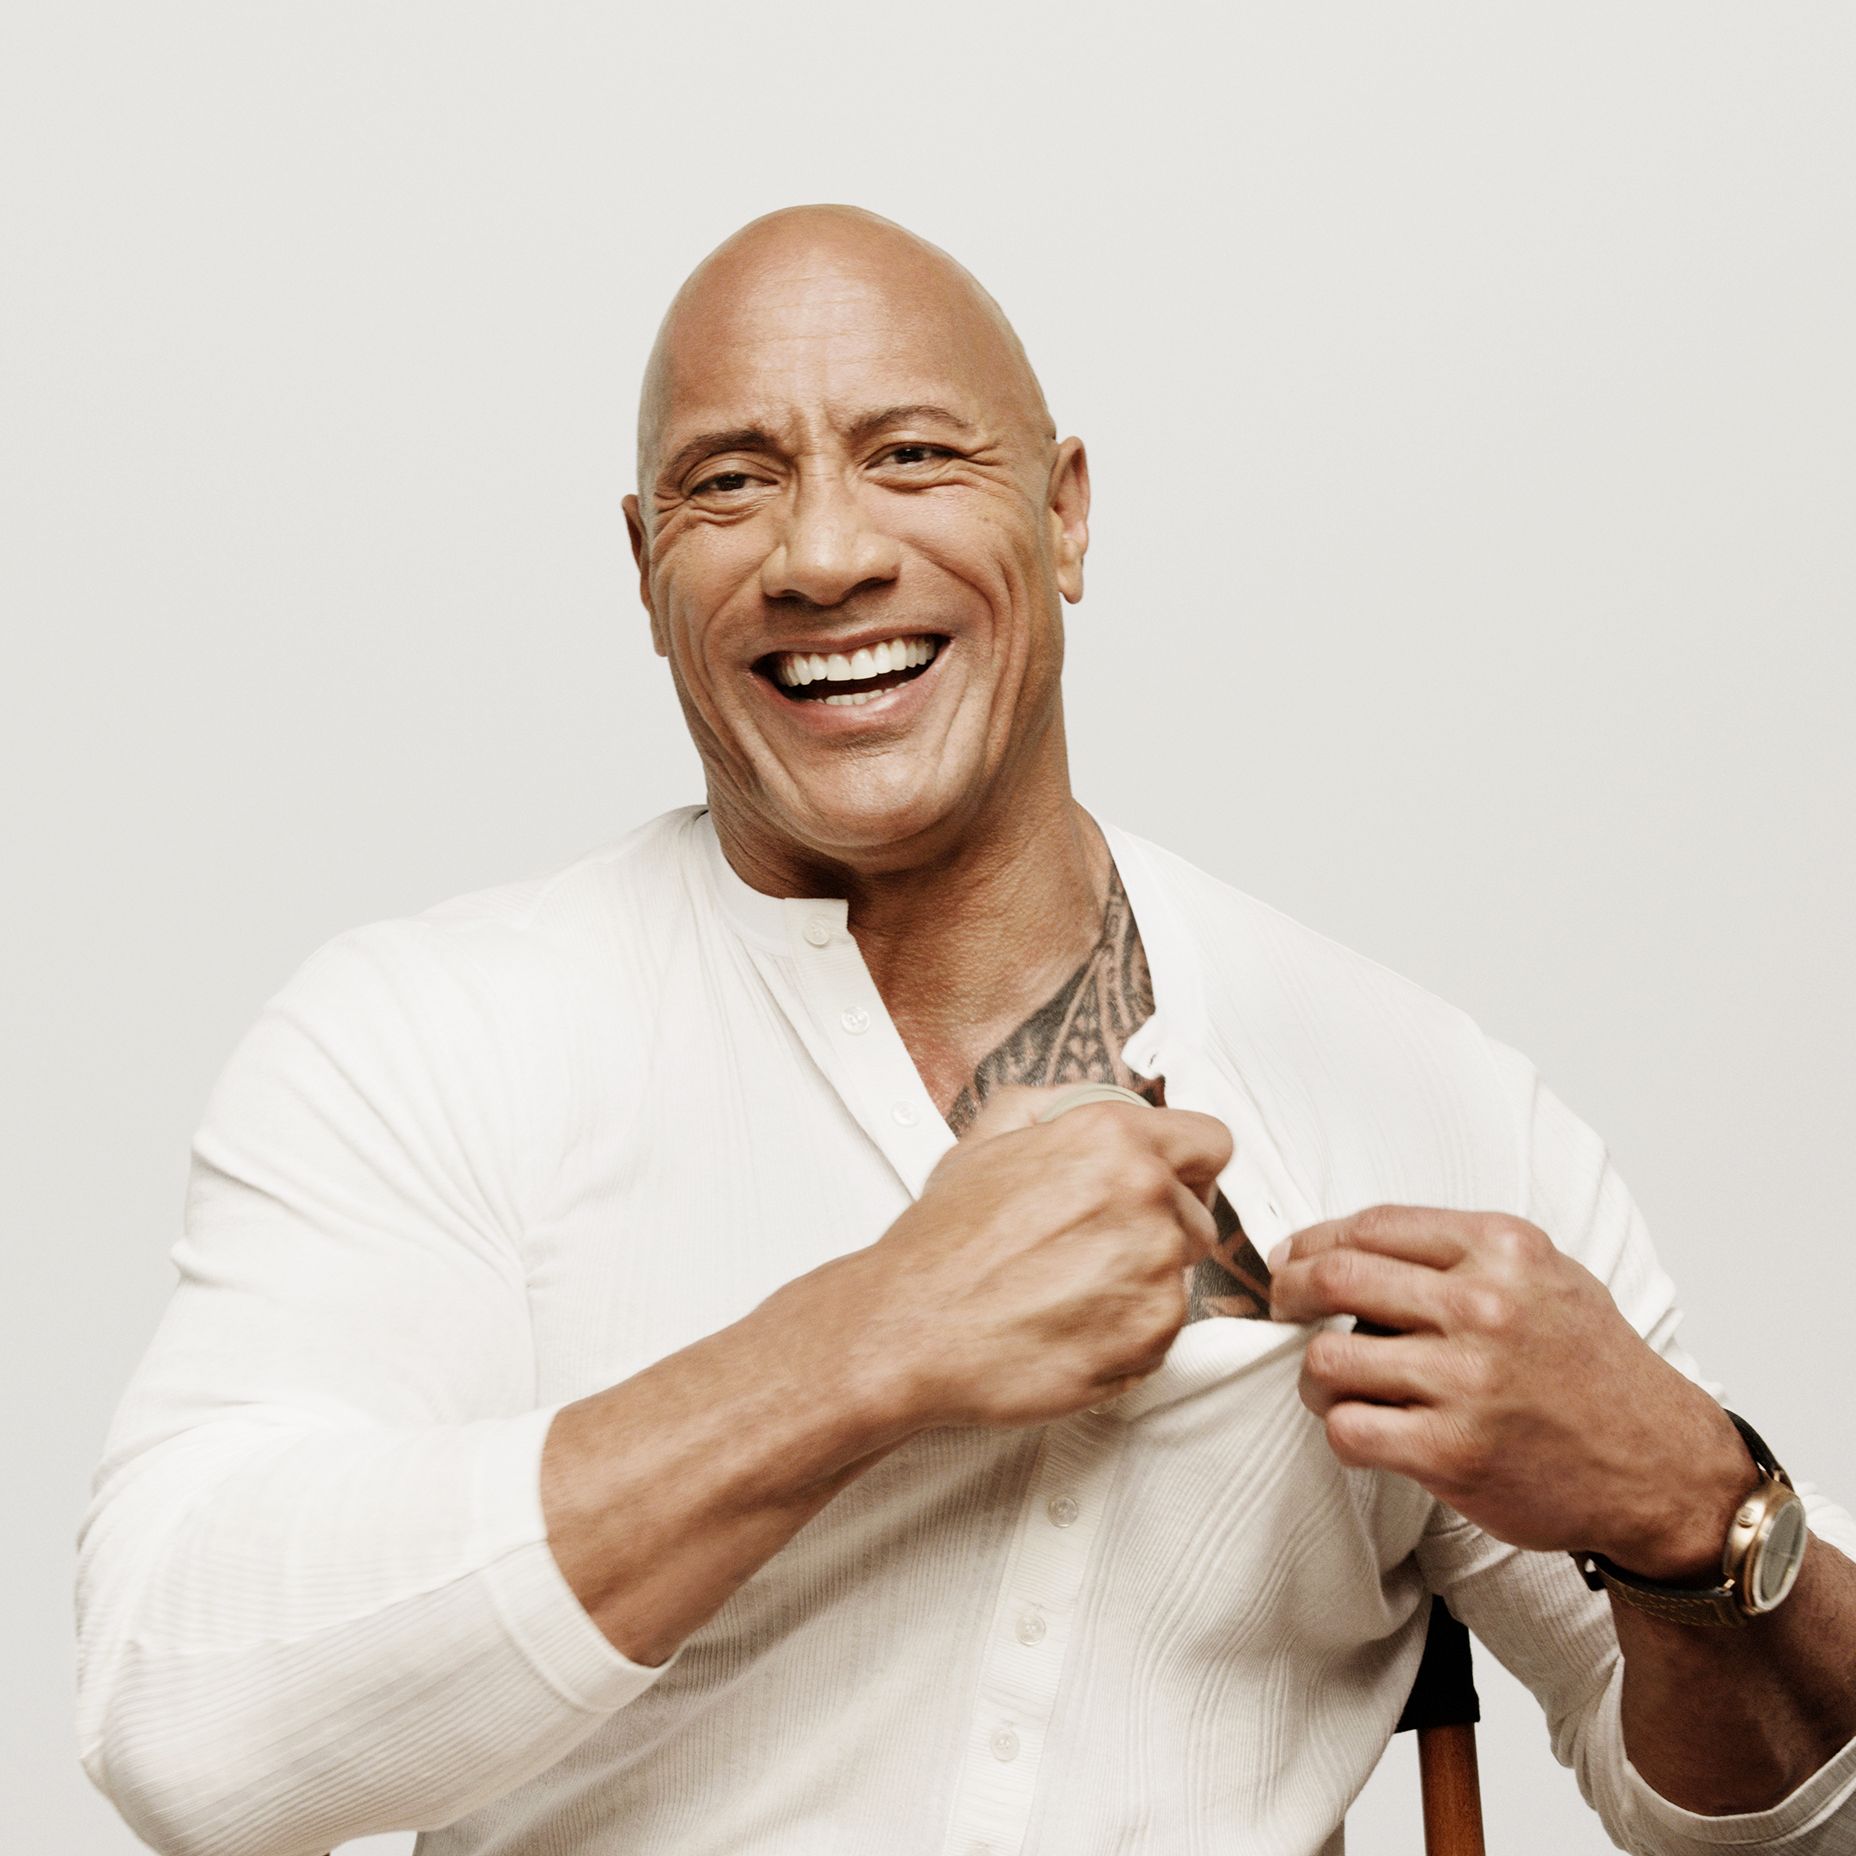 The Rock Wants His $10 Skincare Line to Be a Part of Your Life